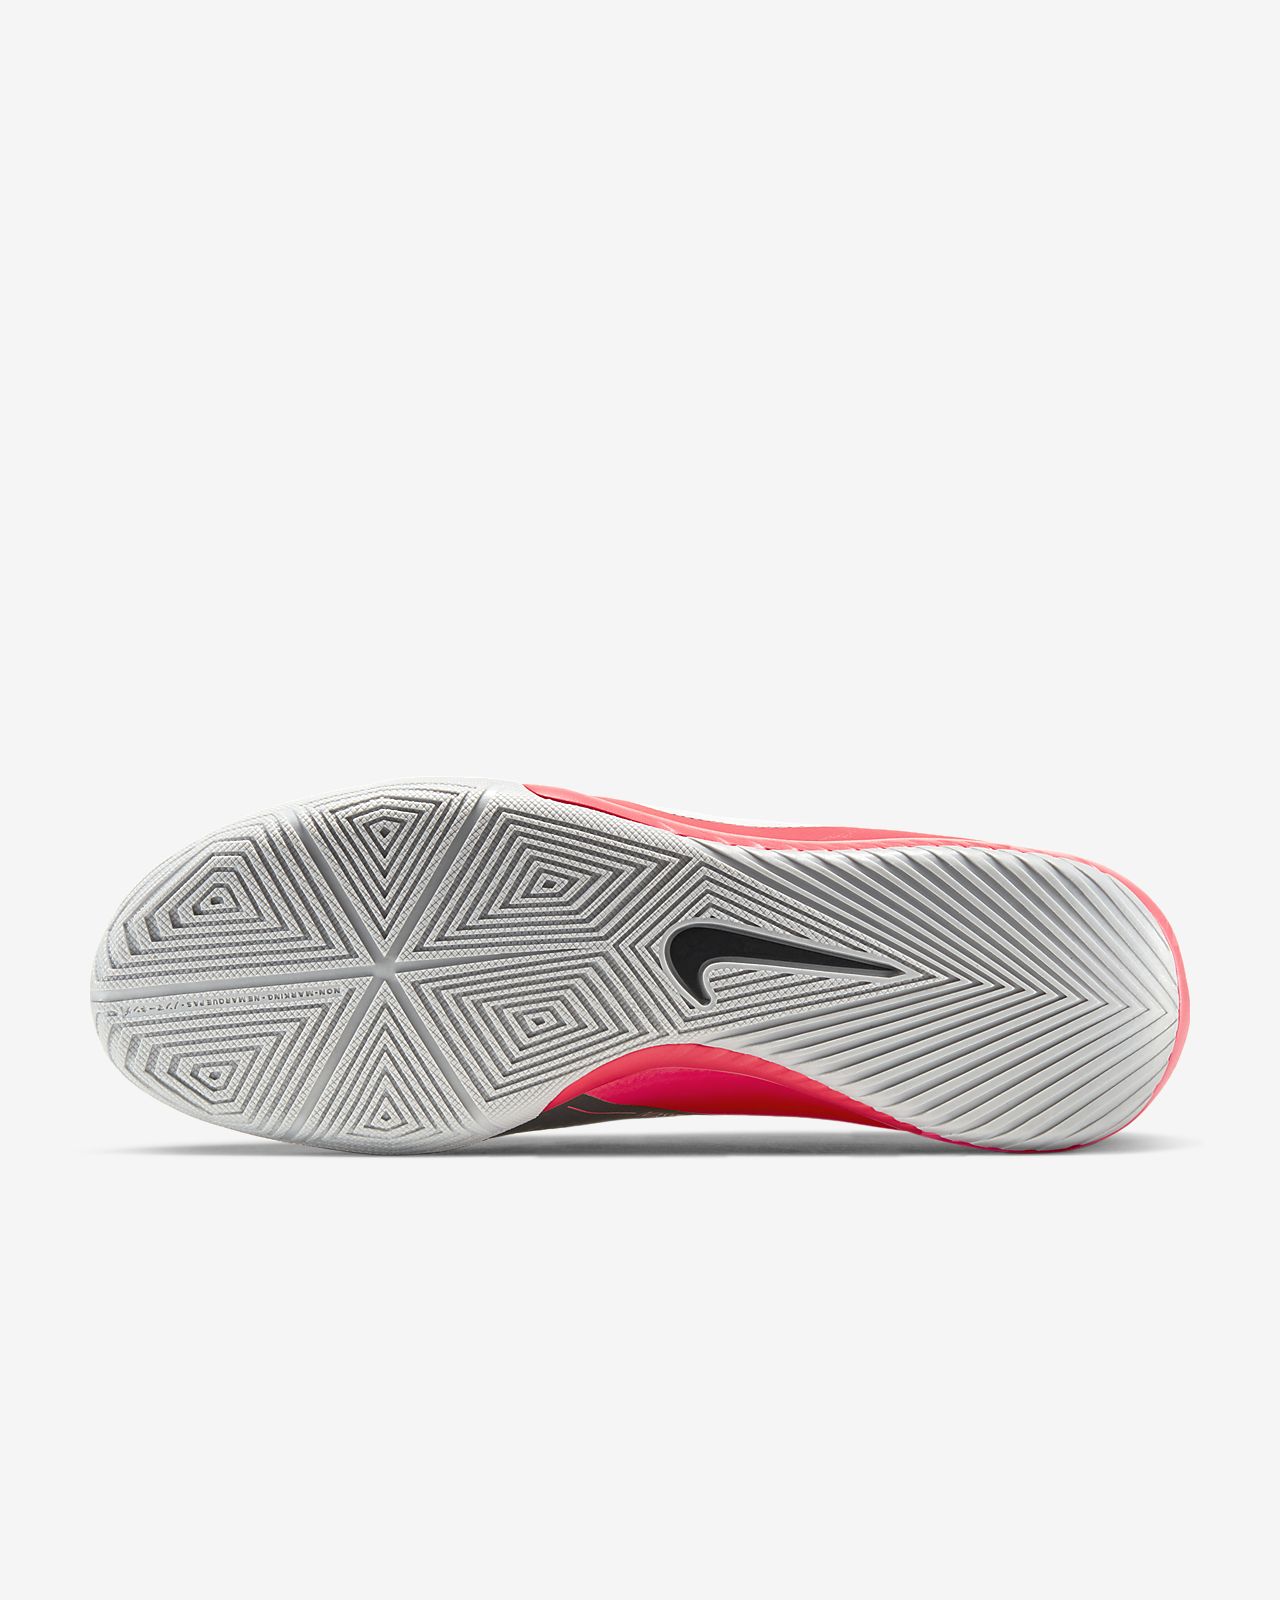 Nike Superfly 7 Academy SG Pro AC Football shoes for.